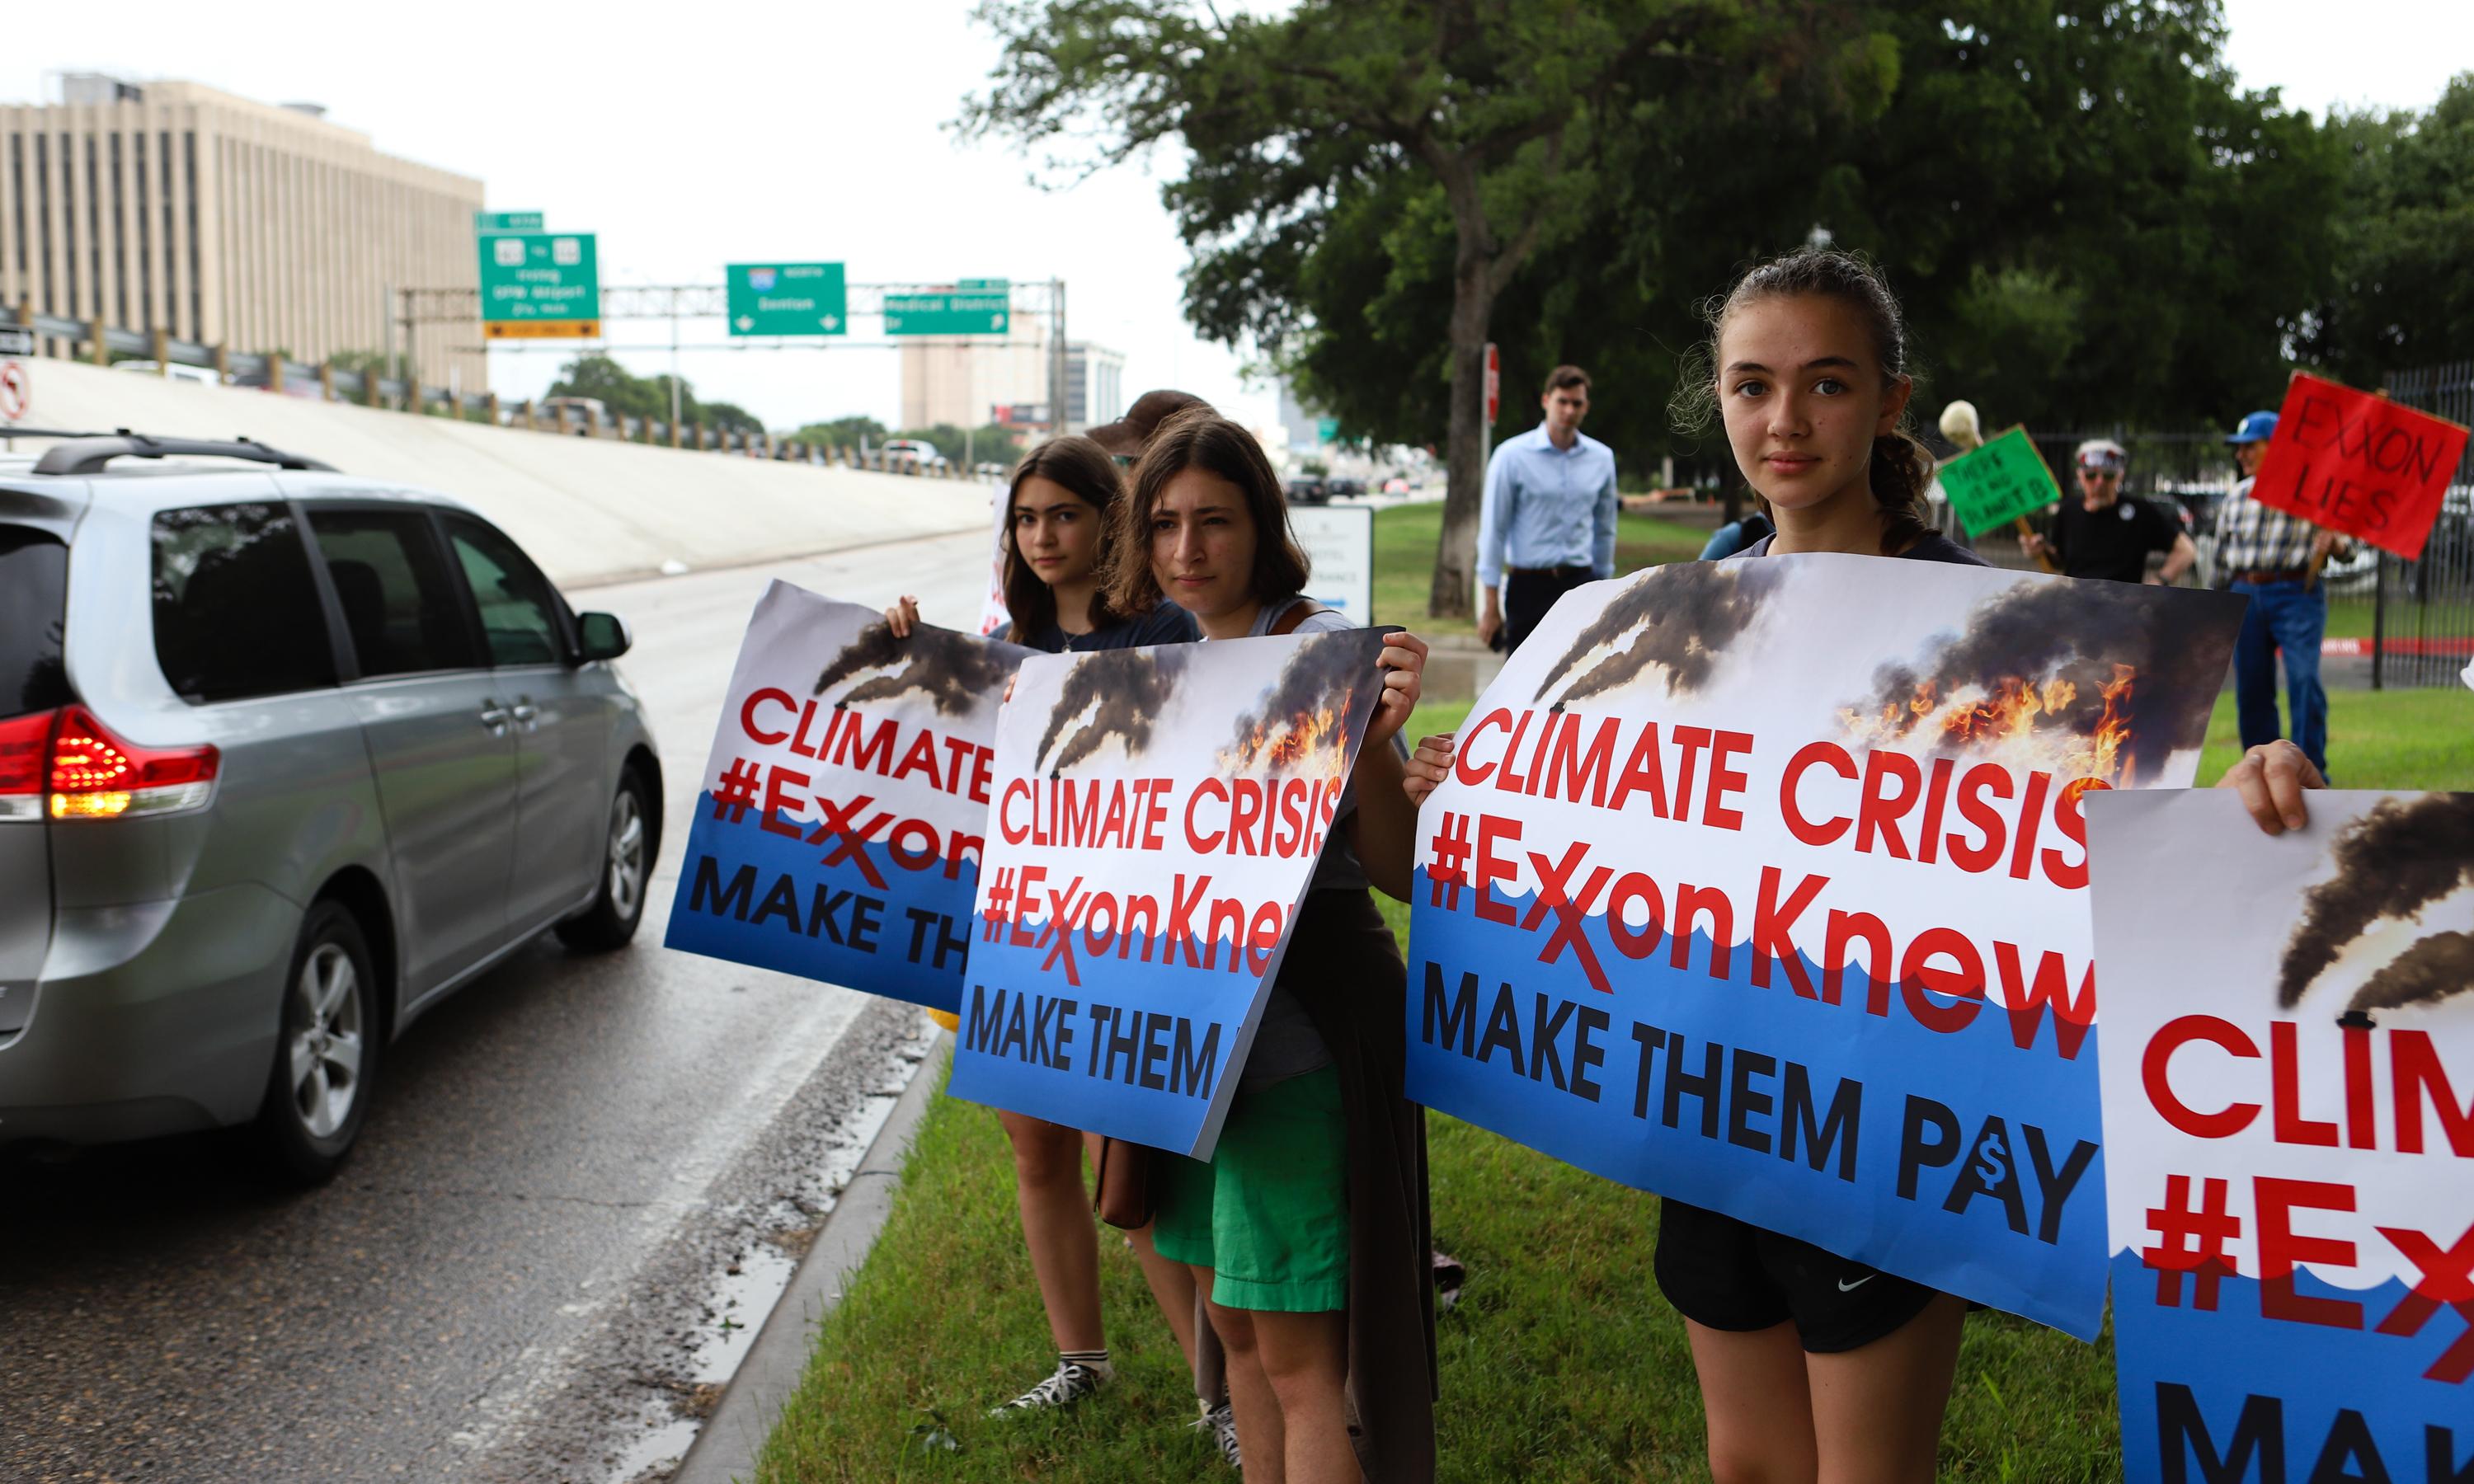 Young girls on the side of the road hold signs that read "Climate Crisis, #ExxonKnew Make Them pay."